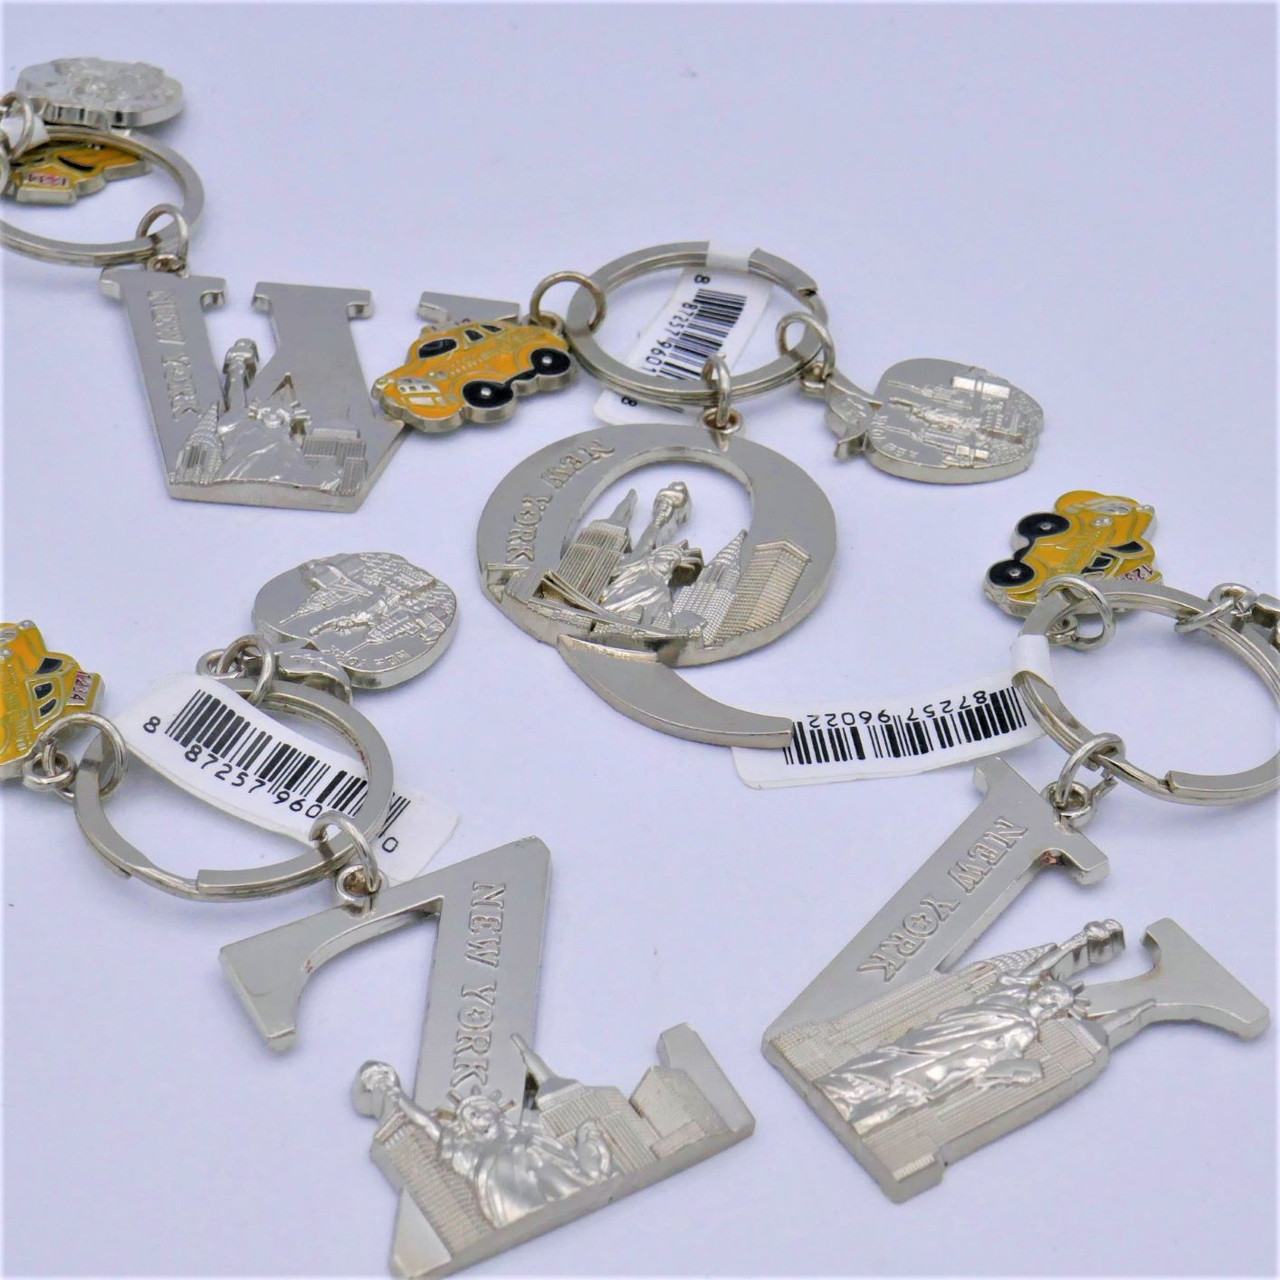 Letter & Initial Keychains Taxi